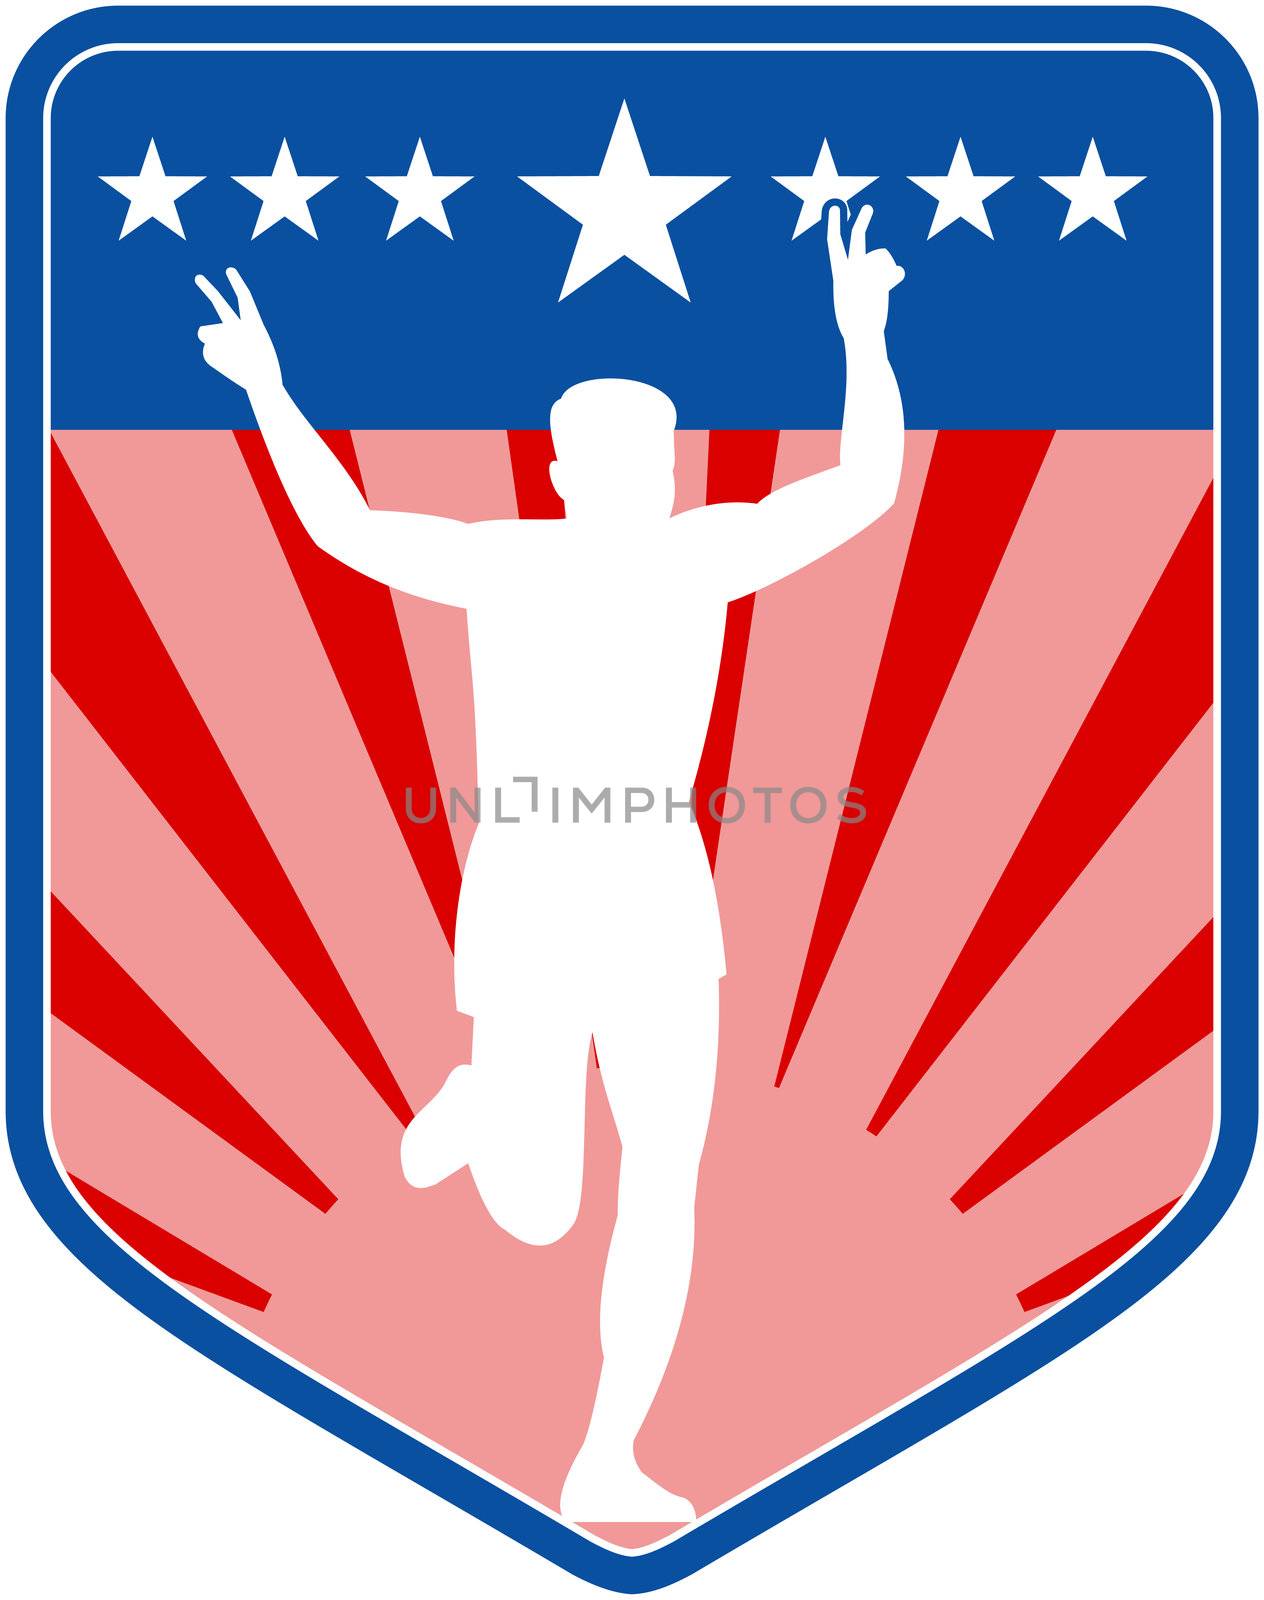 illustration of a silhouette of Marathon runner flashing victory sign done in retro style with  stars sunburst and stripes in shield